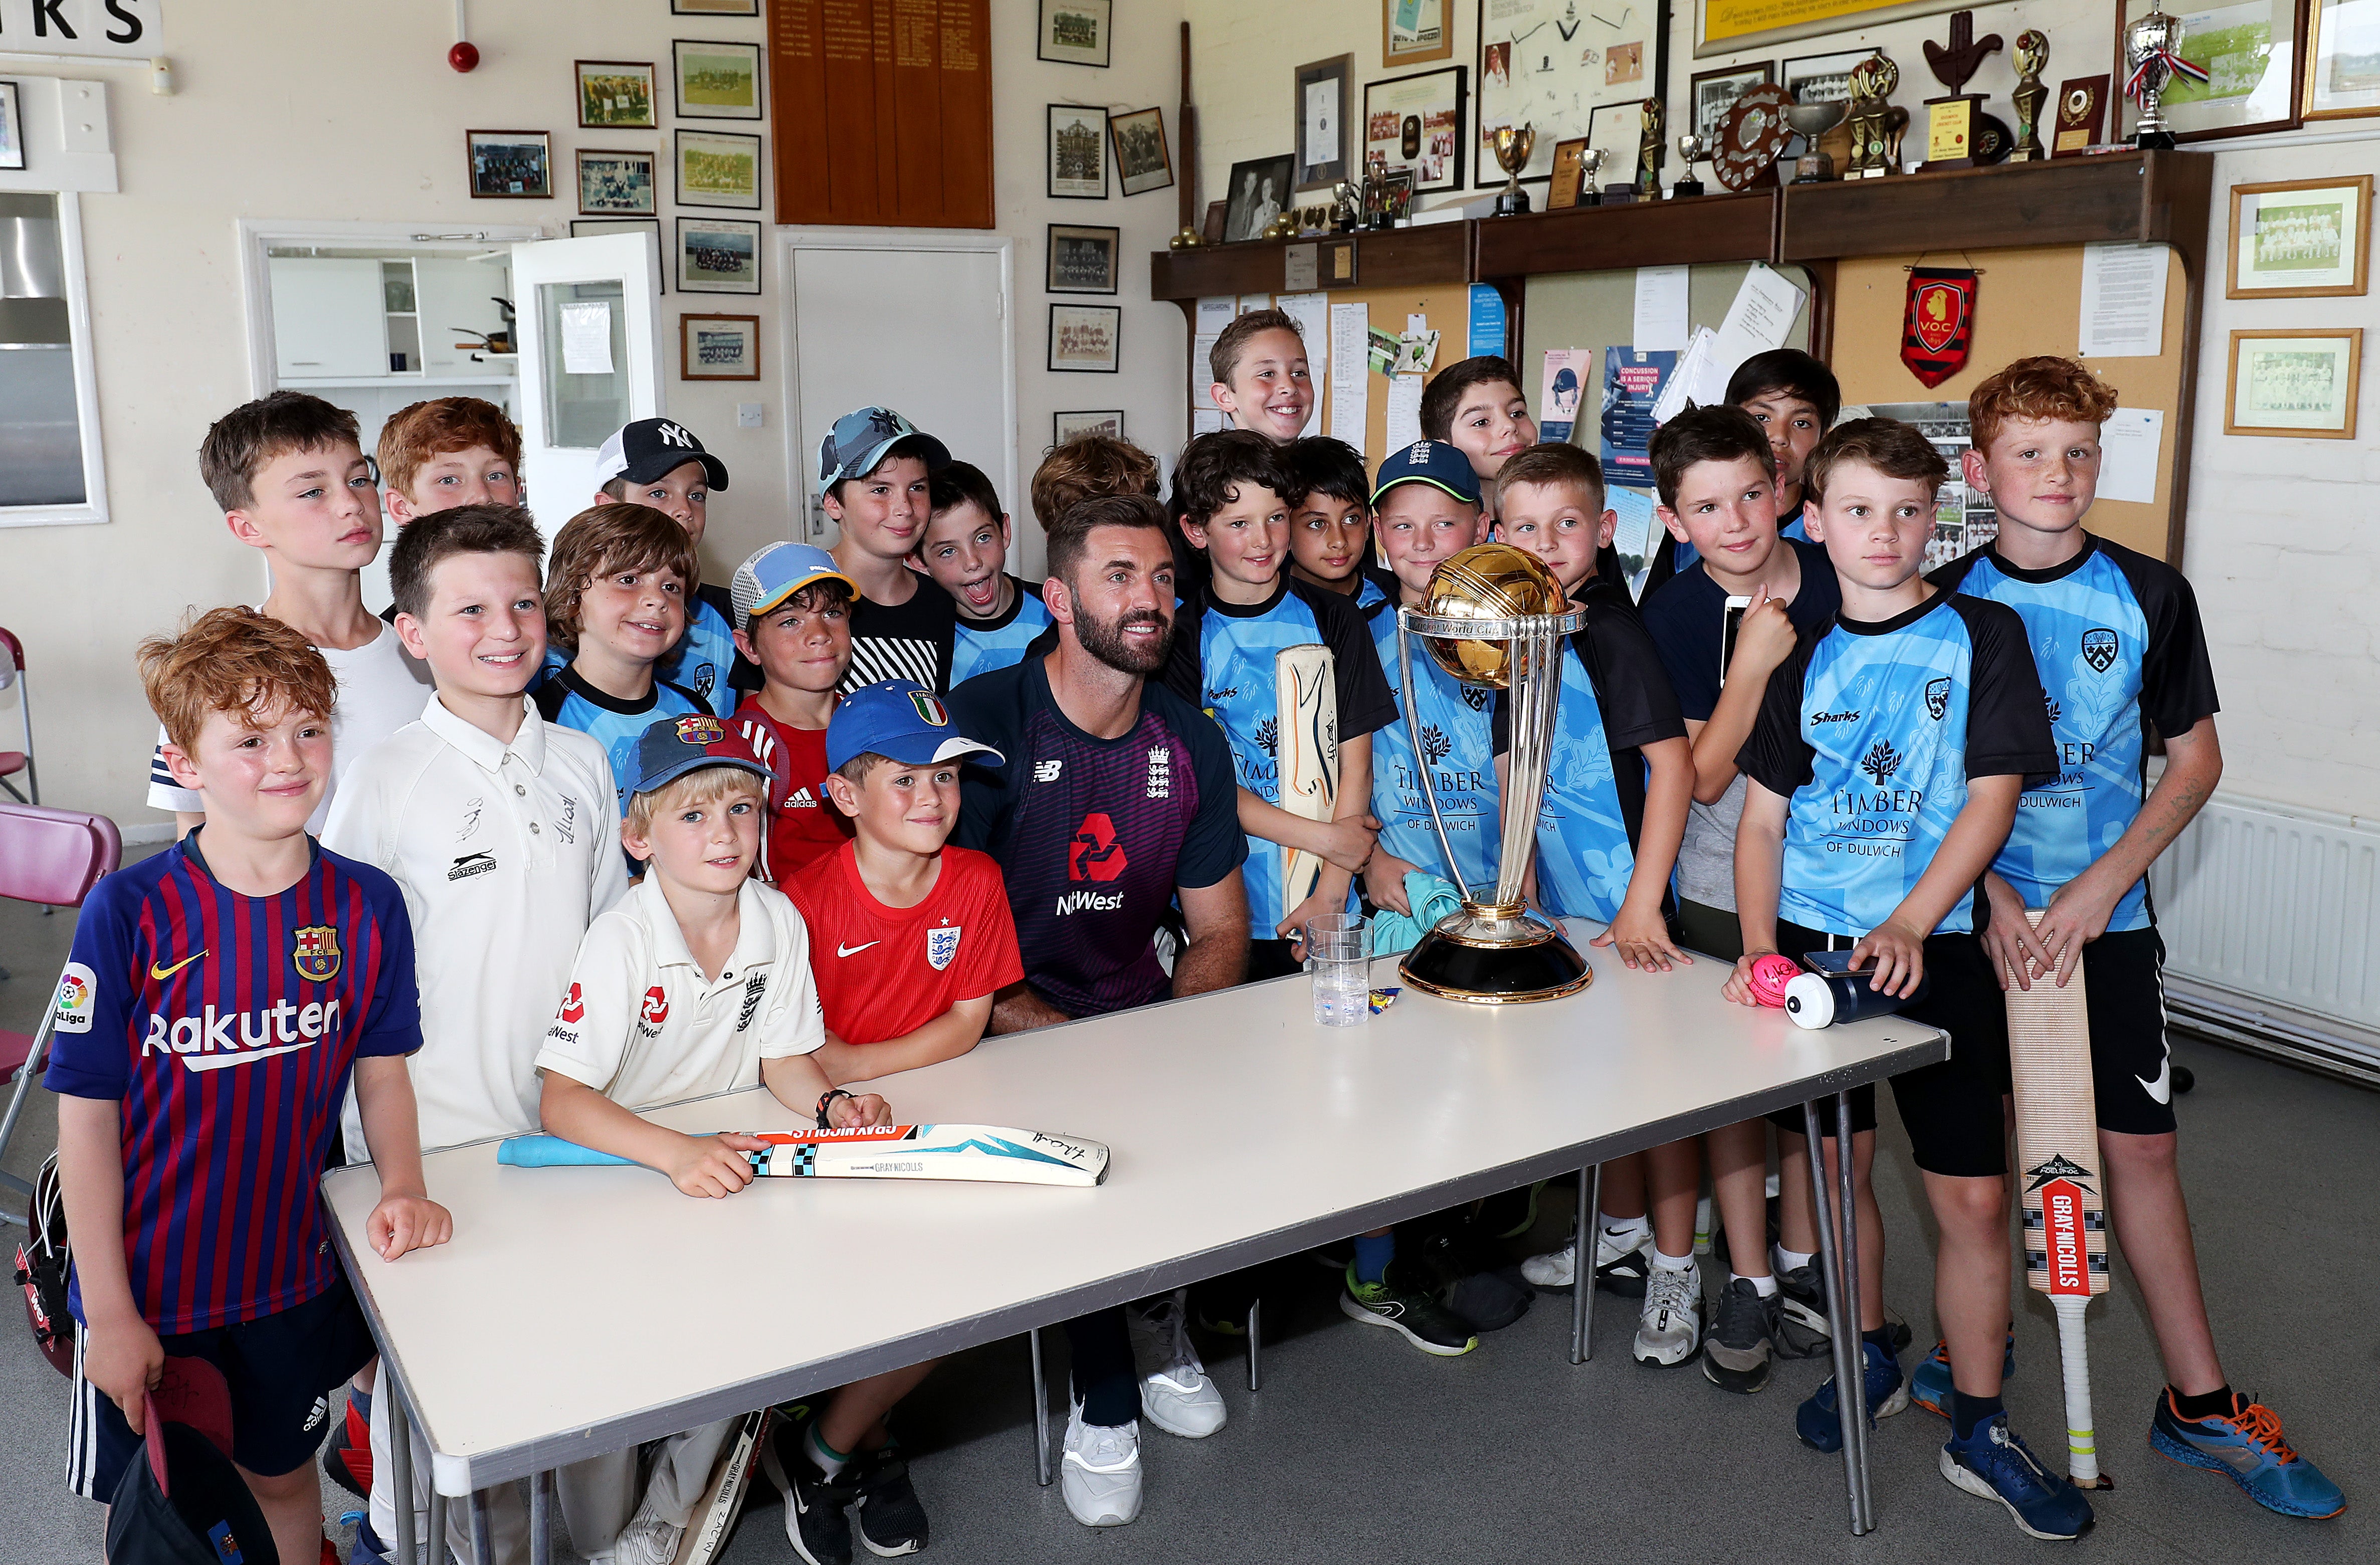 Liam Plunkett admits the children he’s coaching don’t know about his cricketing past